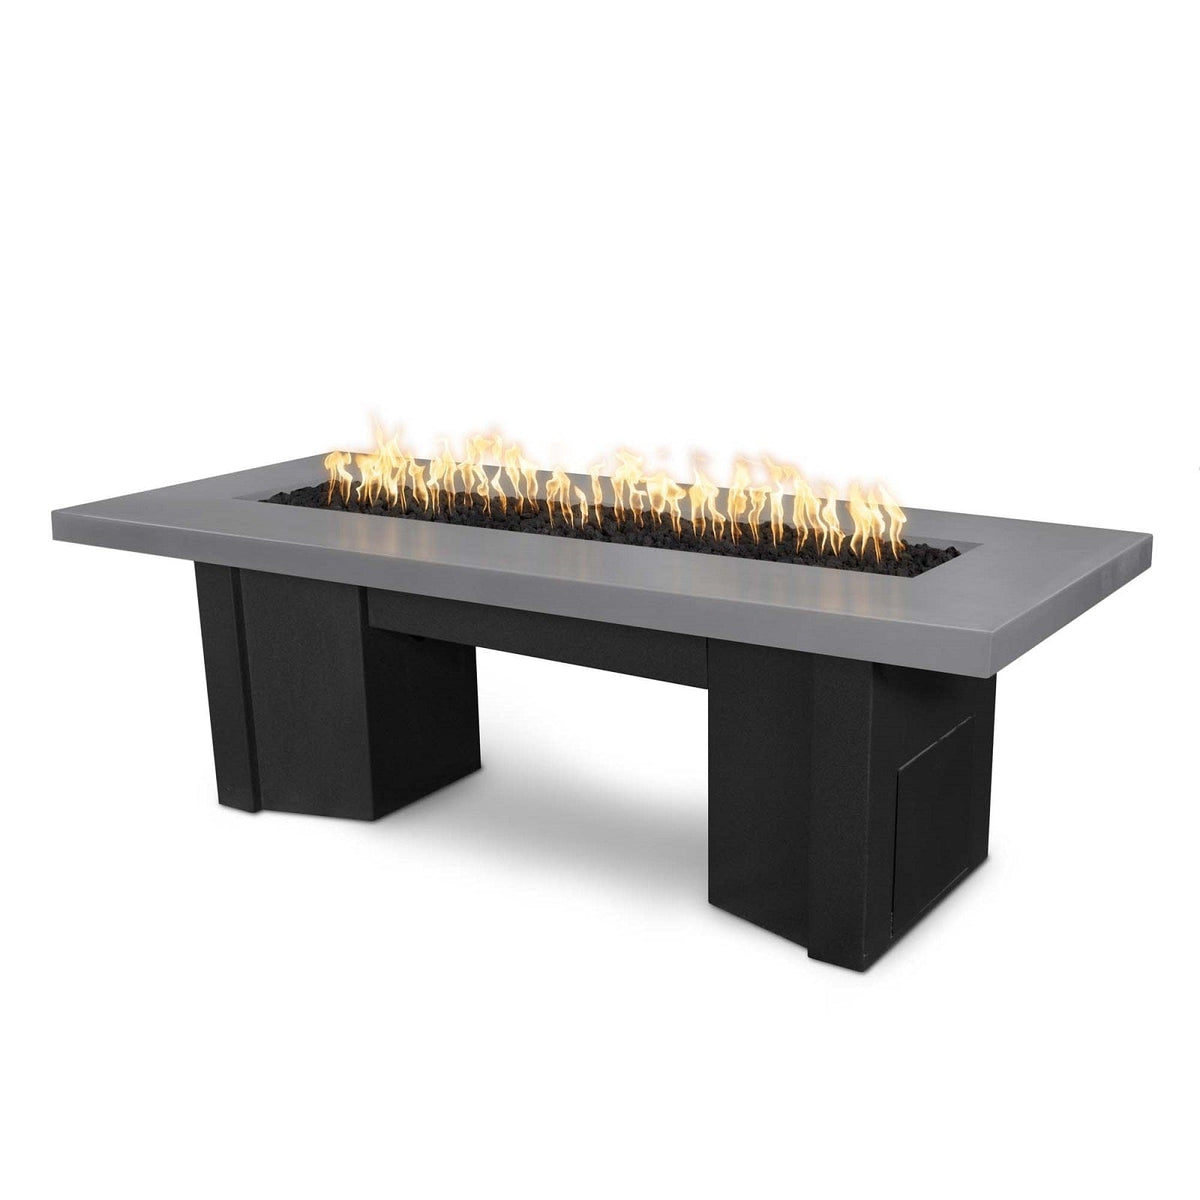 The Outdoor Plus Fire Features Natural Gray (-NGY) / Black Powder Coated Steel (-BLK) The Outdoor Plus 60&quot; Alameda Fire Table Smooth Concrete in Liquid Propane - Match Lit with Flame Sense System / OPT-ALMGFRC60FSML-LP